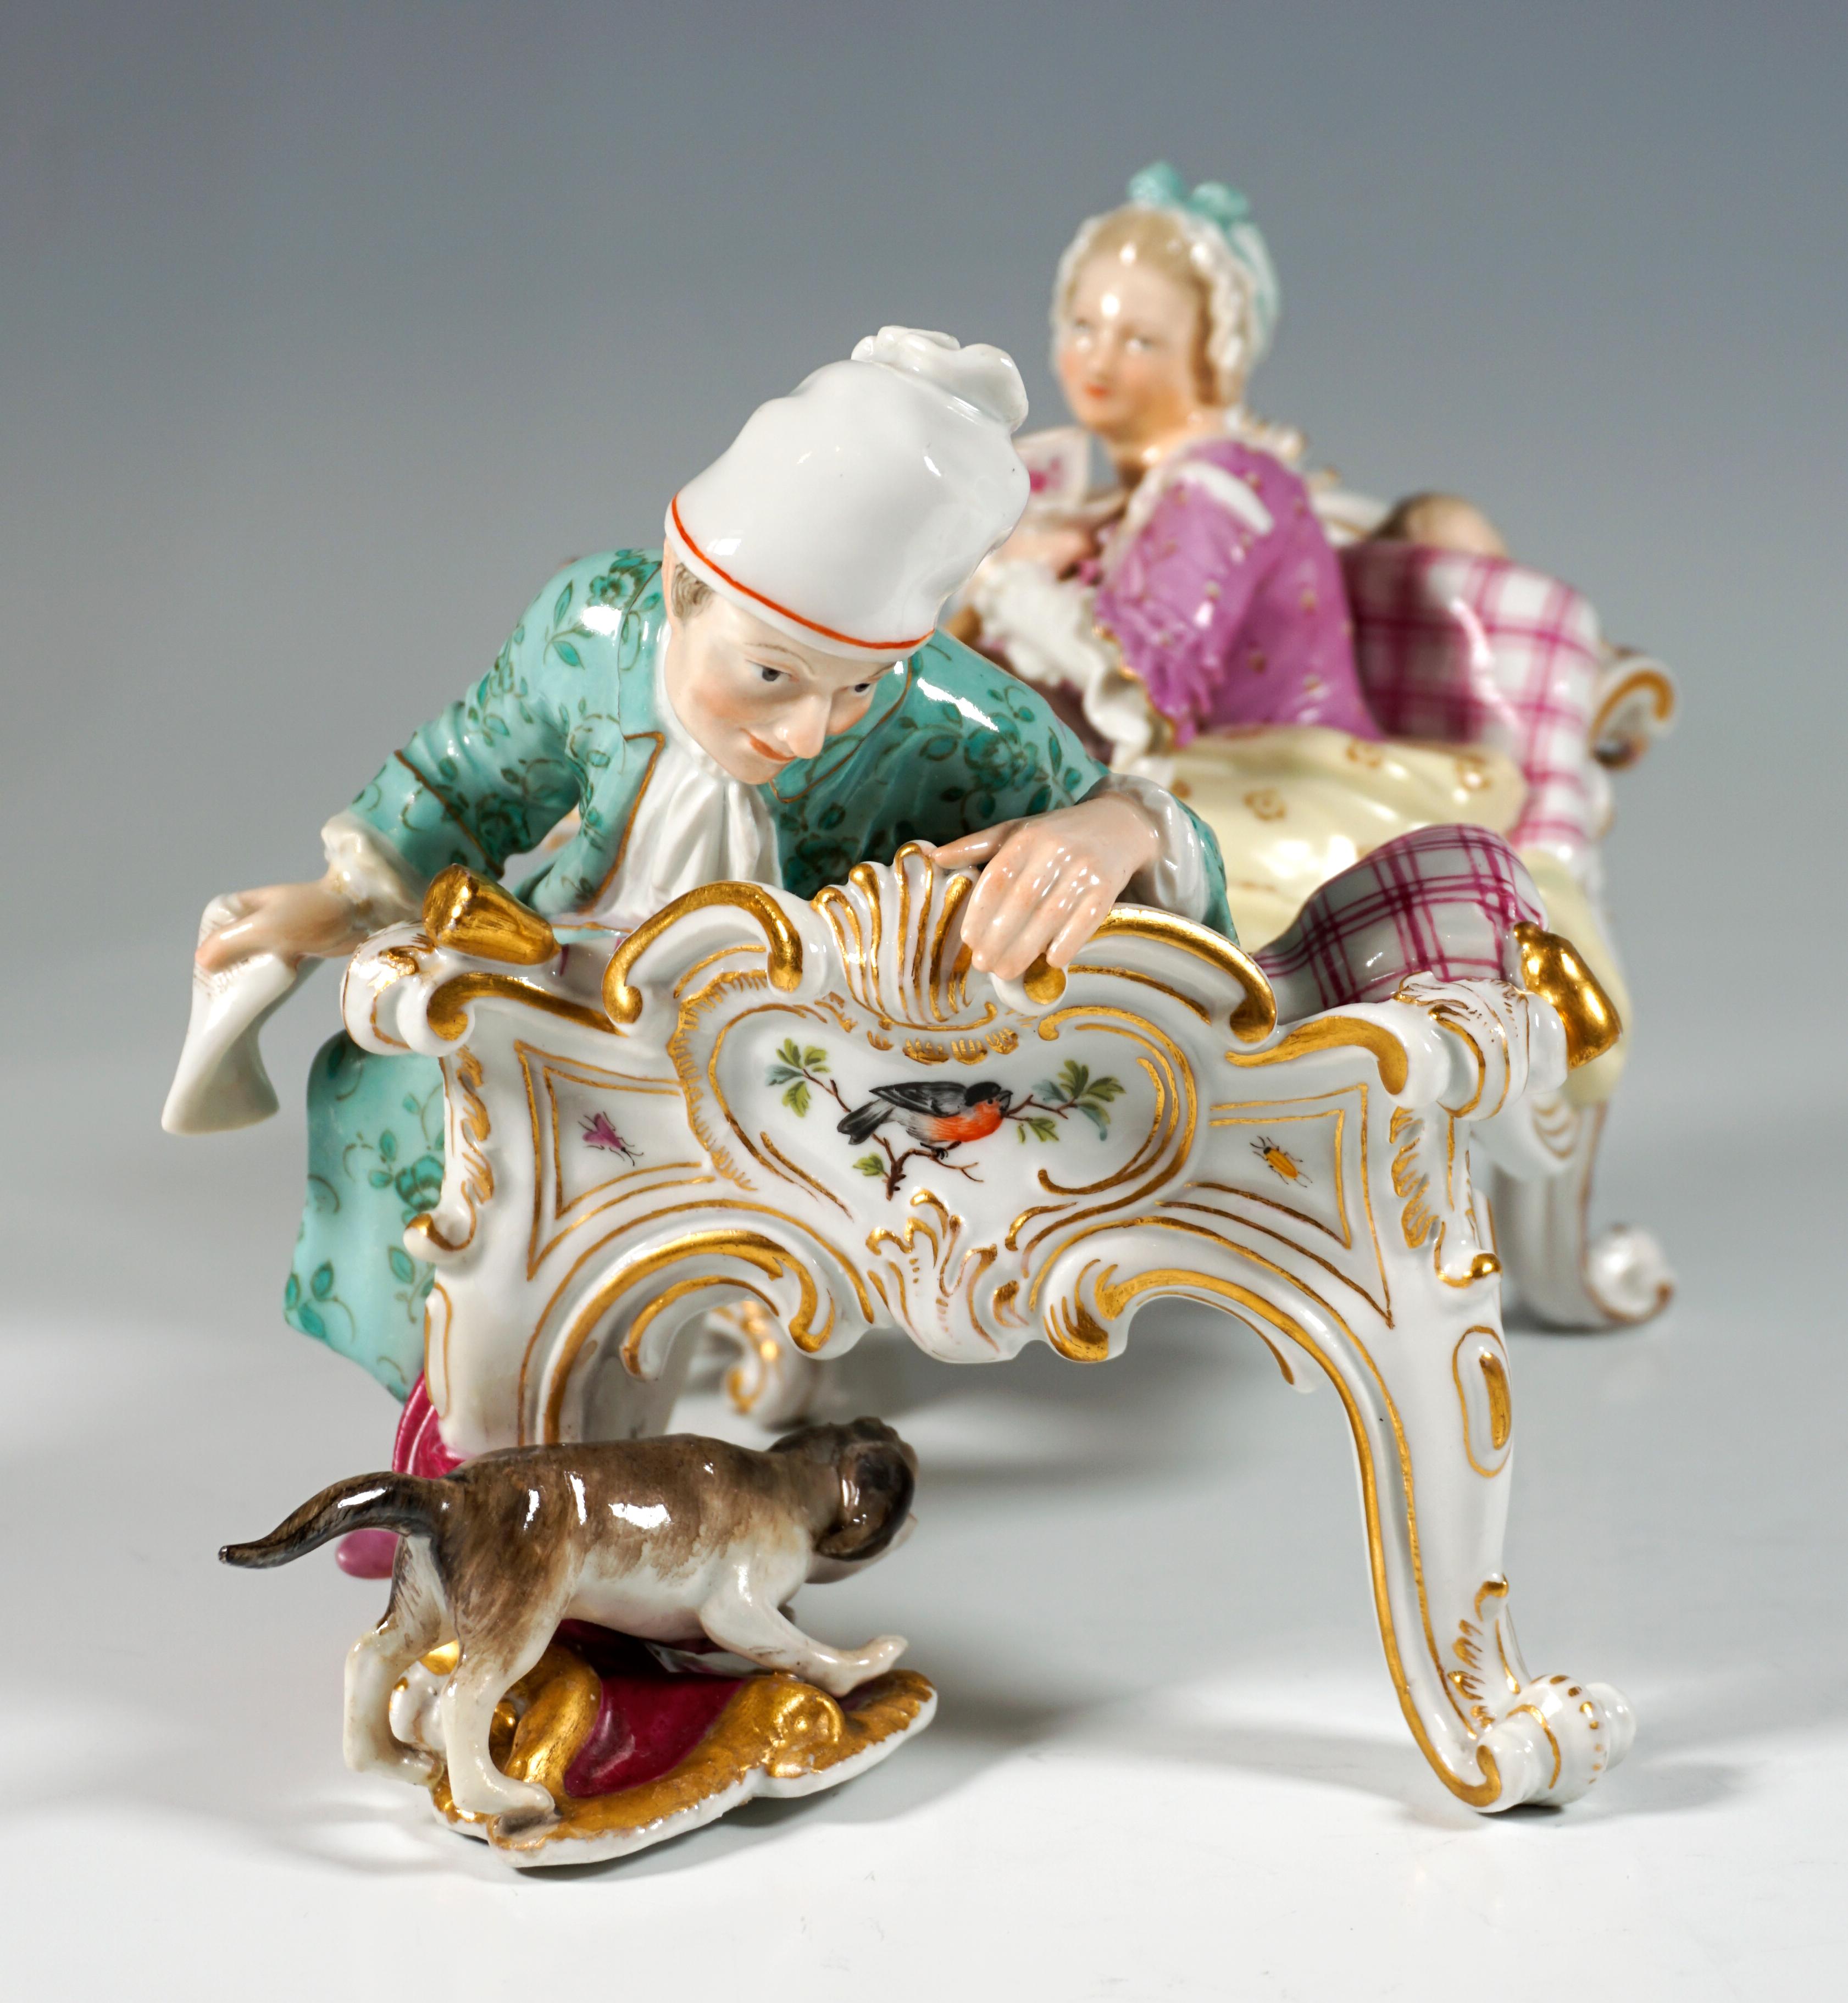 Mid-19th Century Meissen Genre Group 'The Discovered Lover', by J.J. Kaendler, Germany, ca 1850